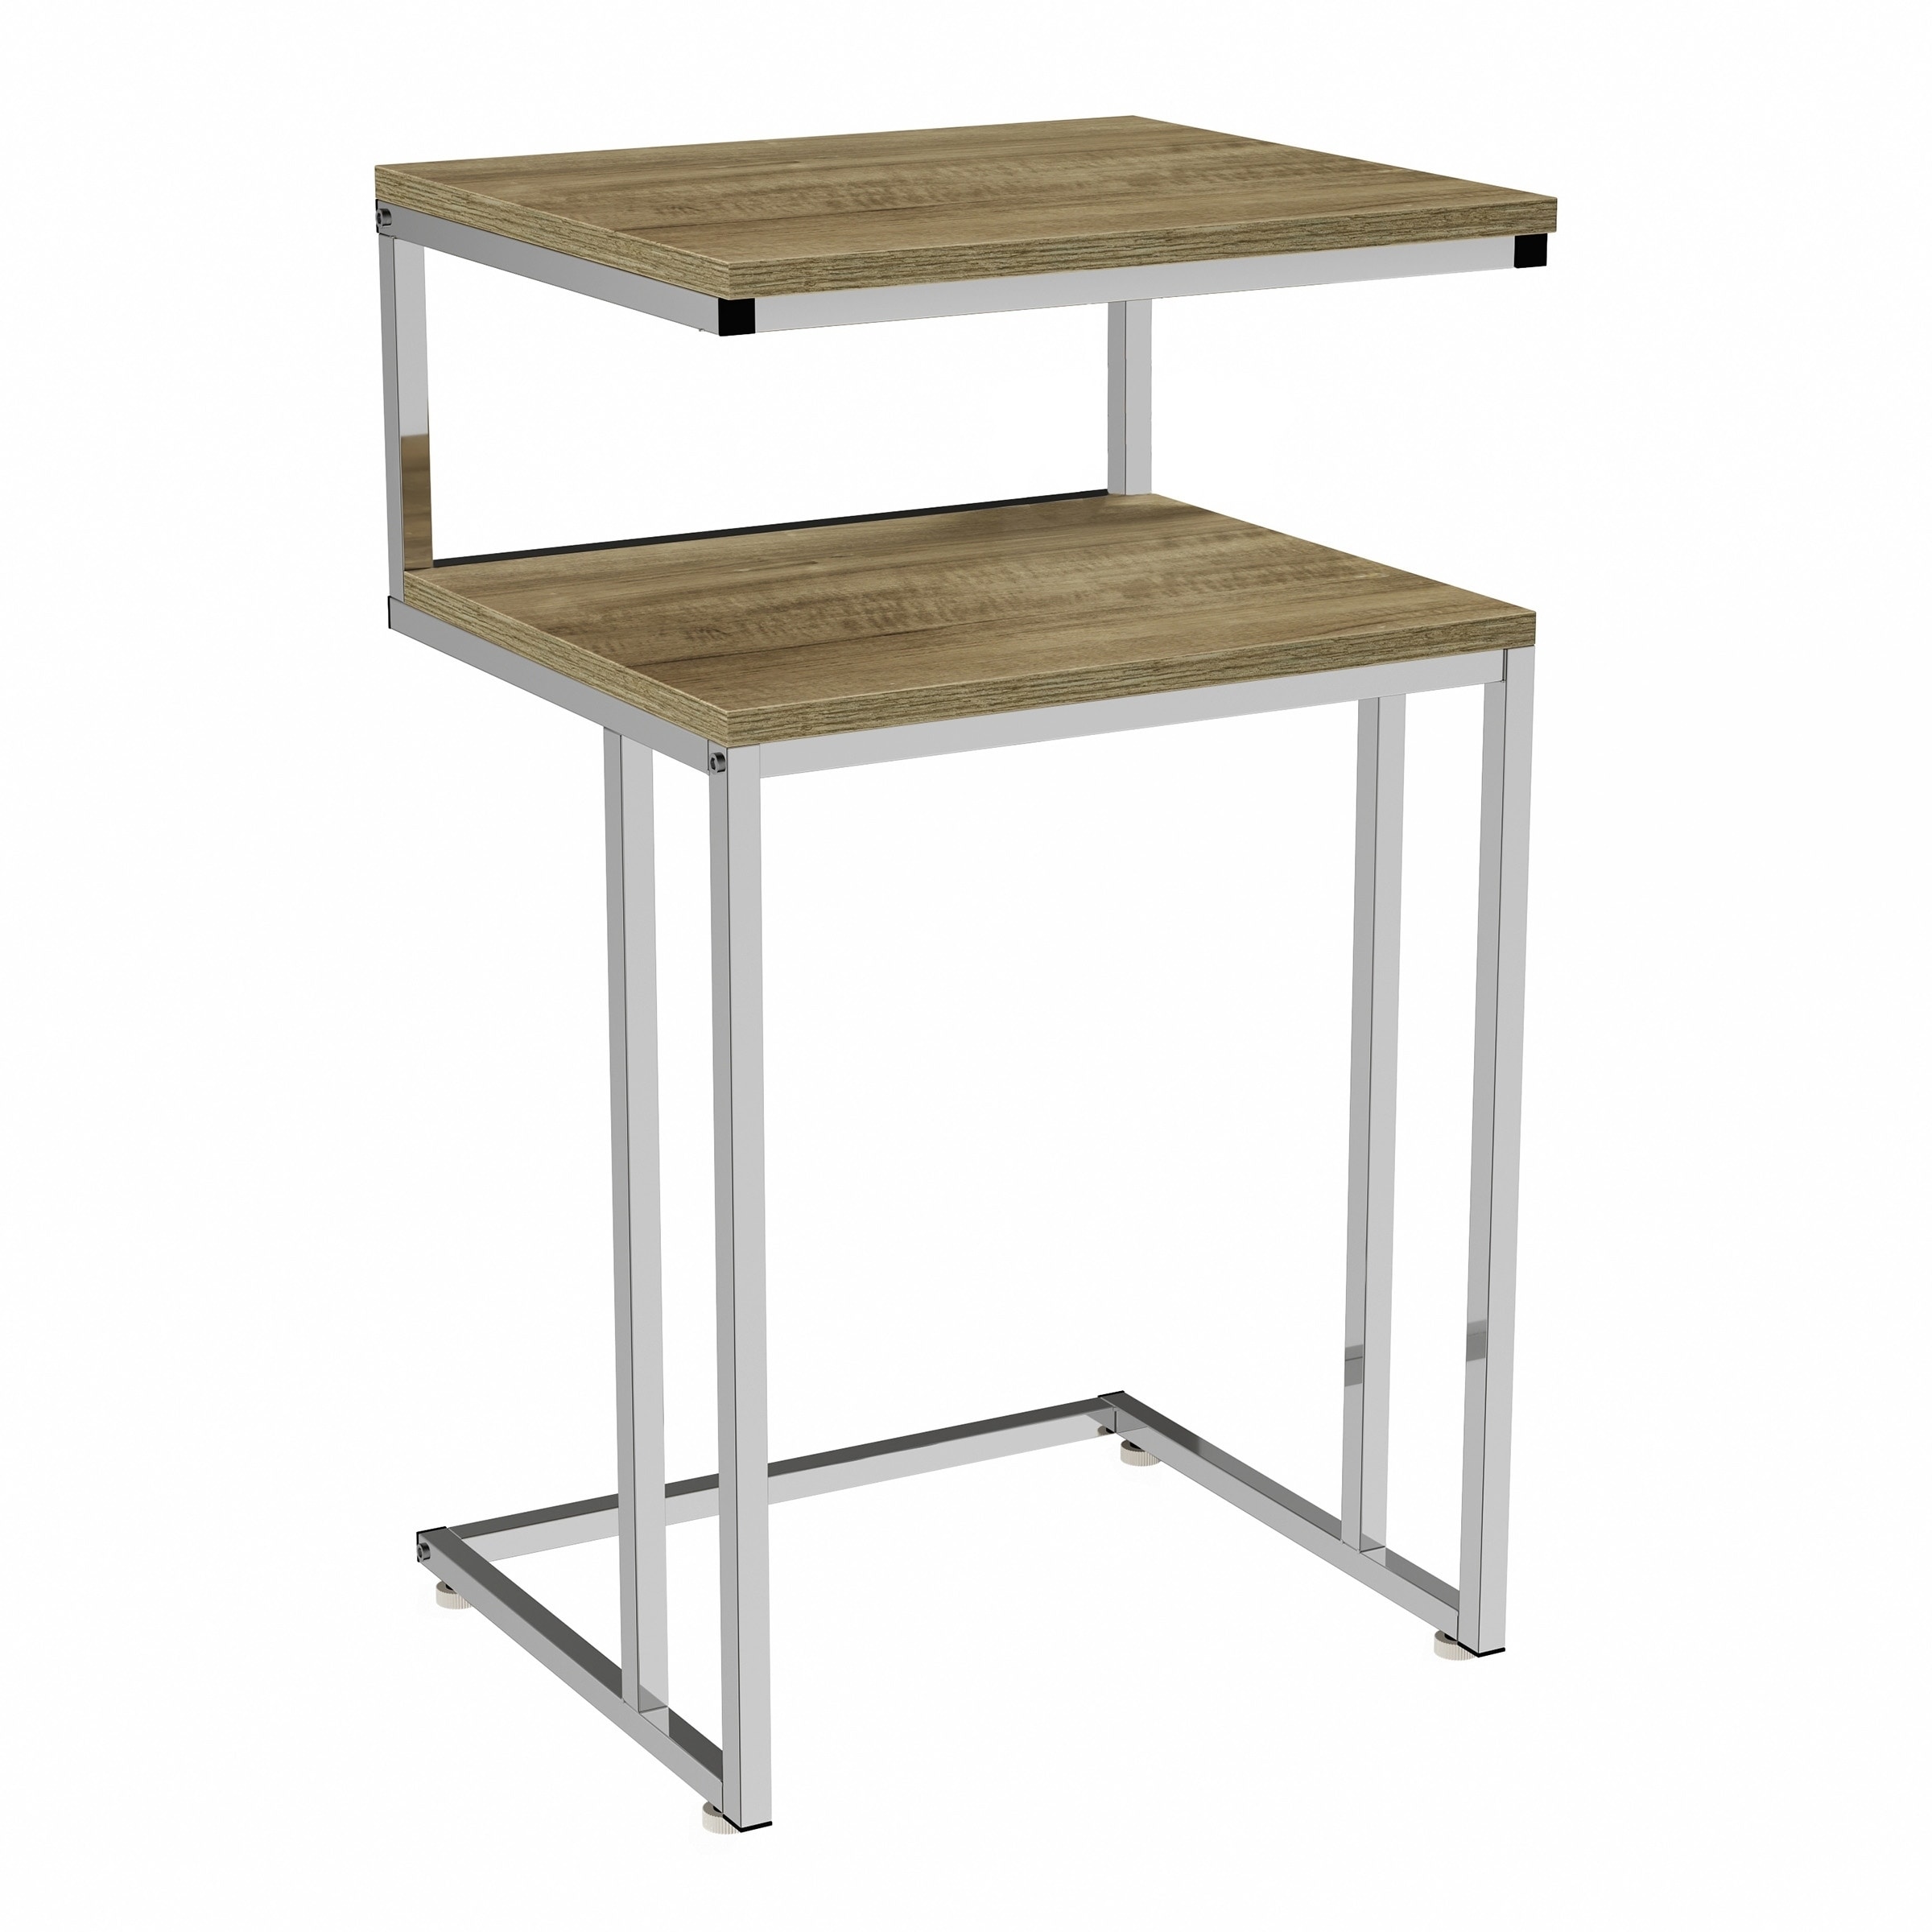 Shop Two Tier Table C Shaped Side Table With Two Shelves By